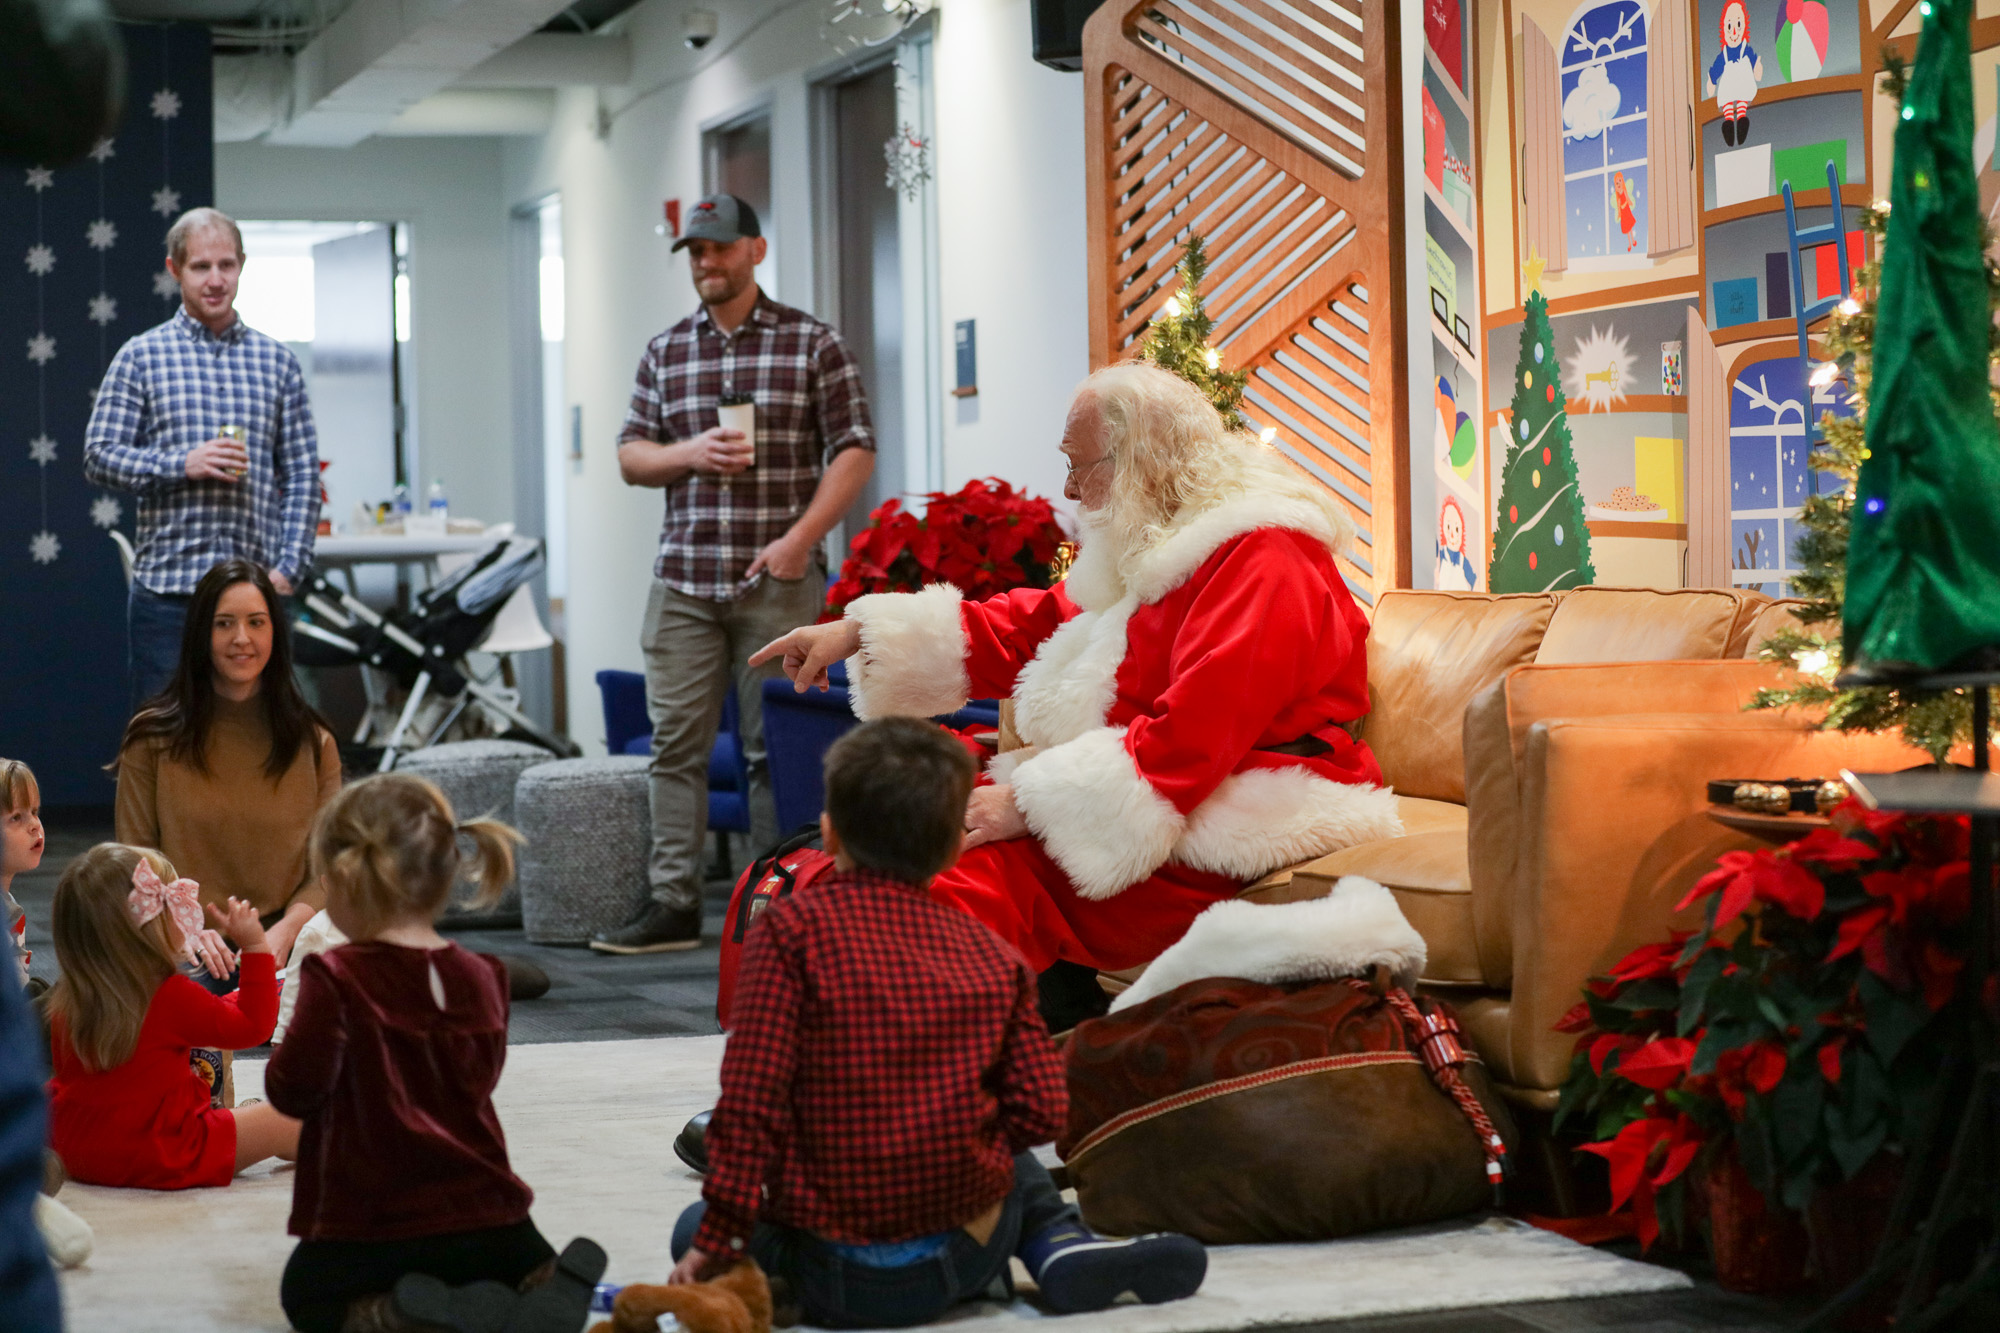 Santa Claus pointing to a child sitting on the floor